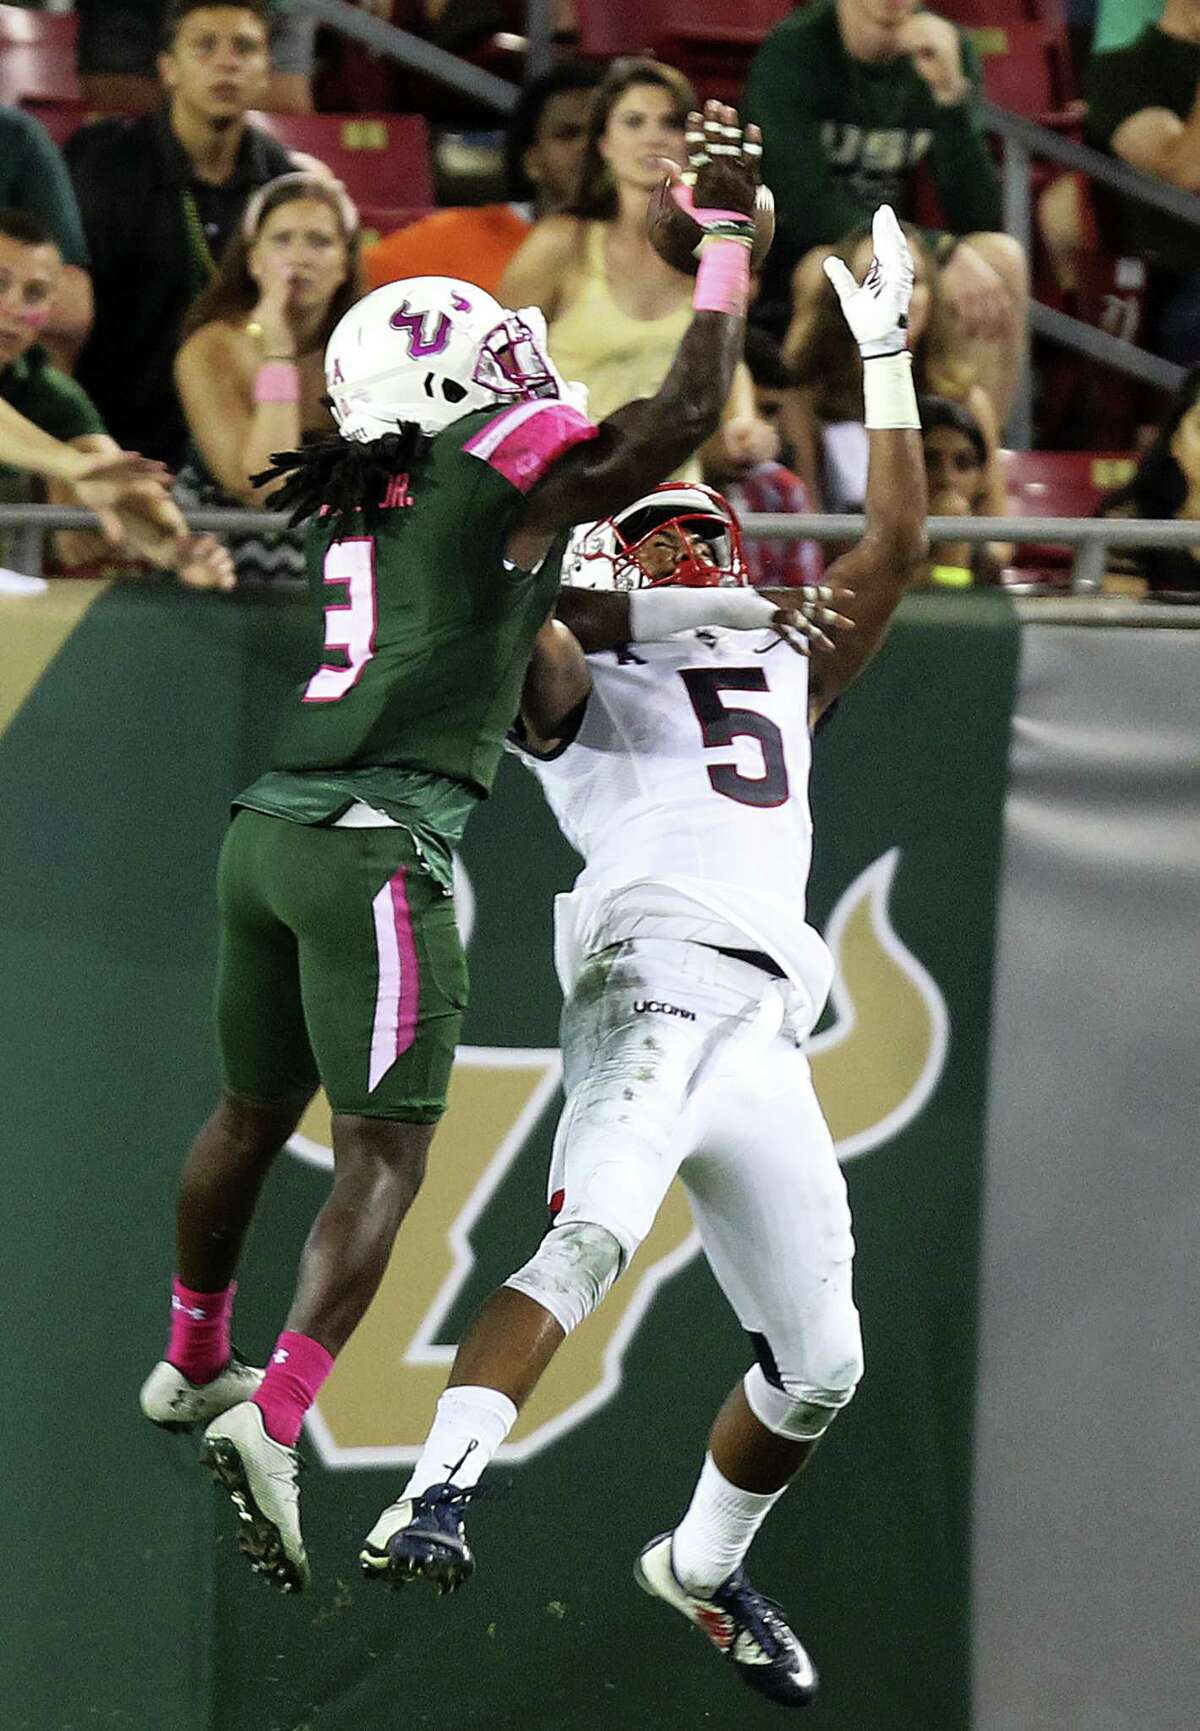 UConn receiver Noel Thomas (5) tries to make a catch against South Florida earlier this season.